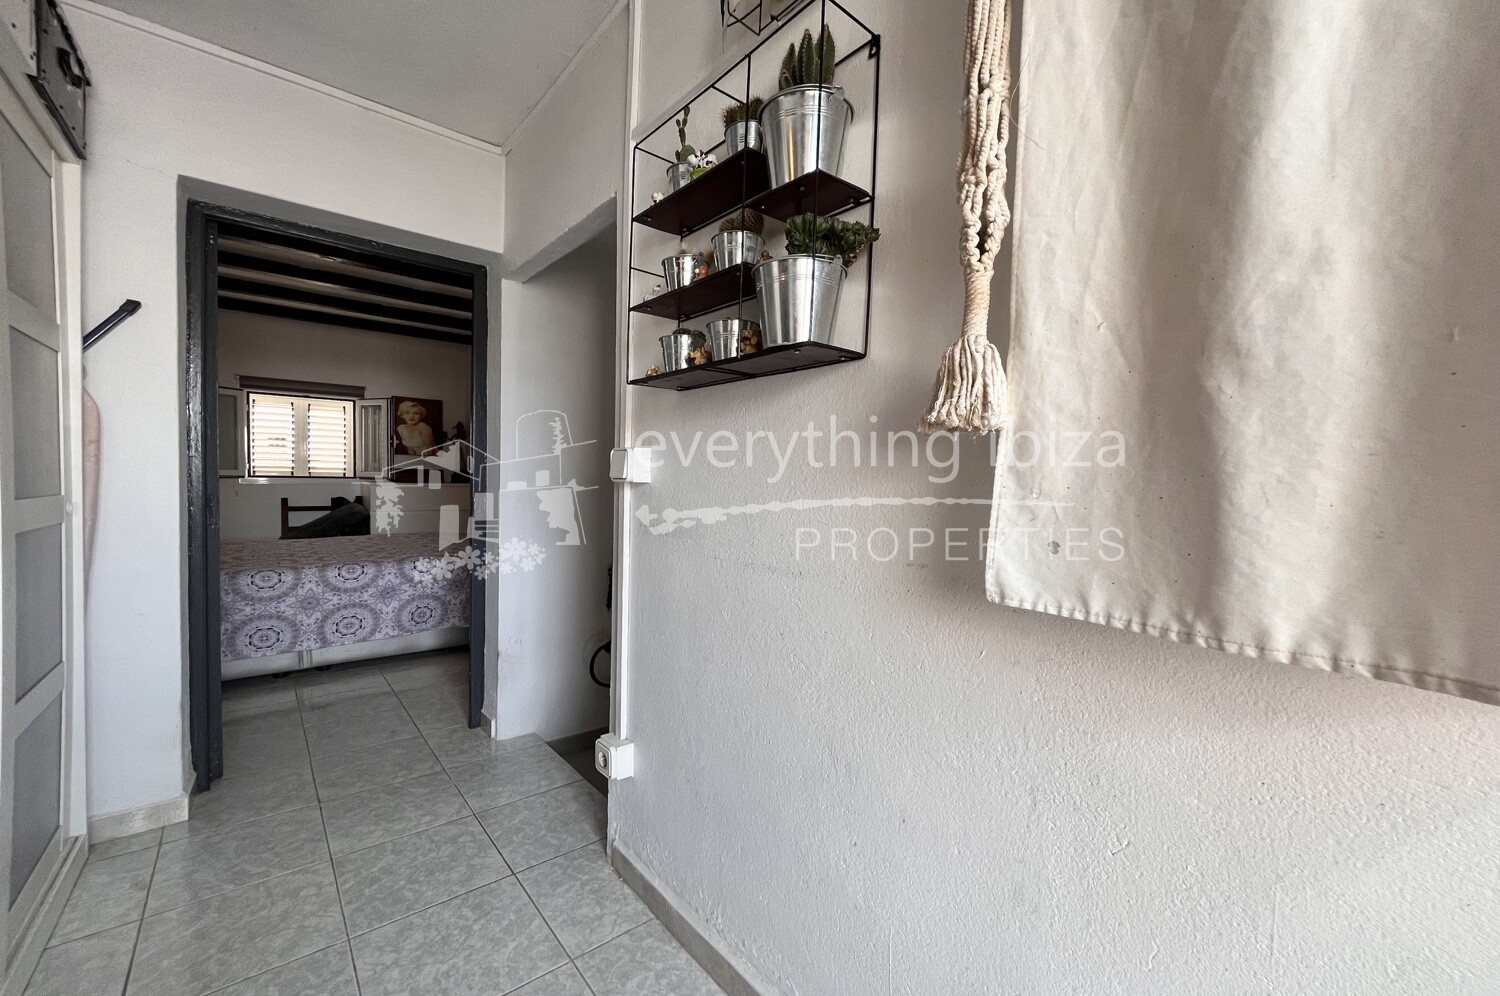 Lovely Renovated Duplex Apartment with Outdoor Terrace, ref. 1615, for sale in Ibiza by everything ibiza Properties